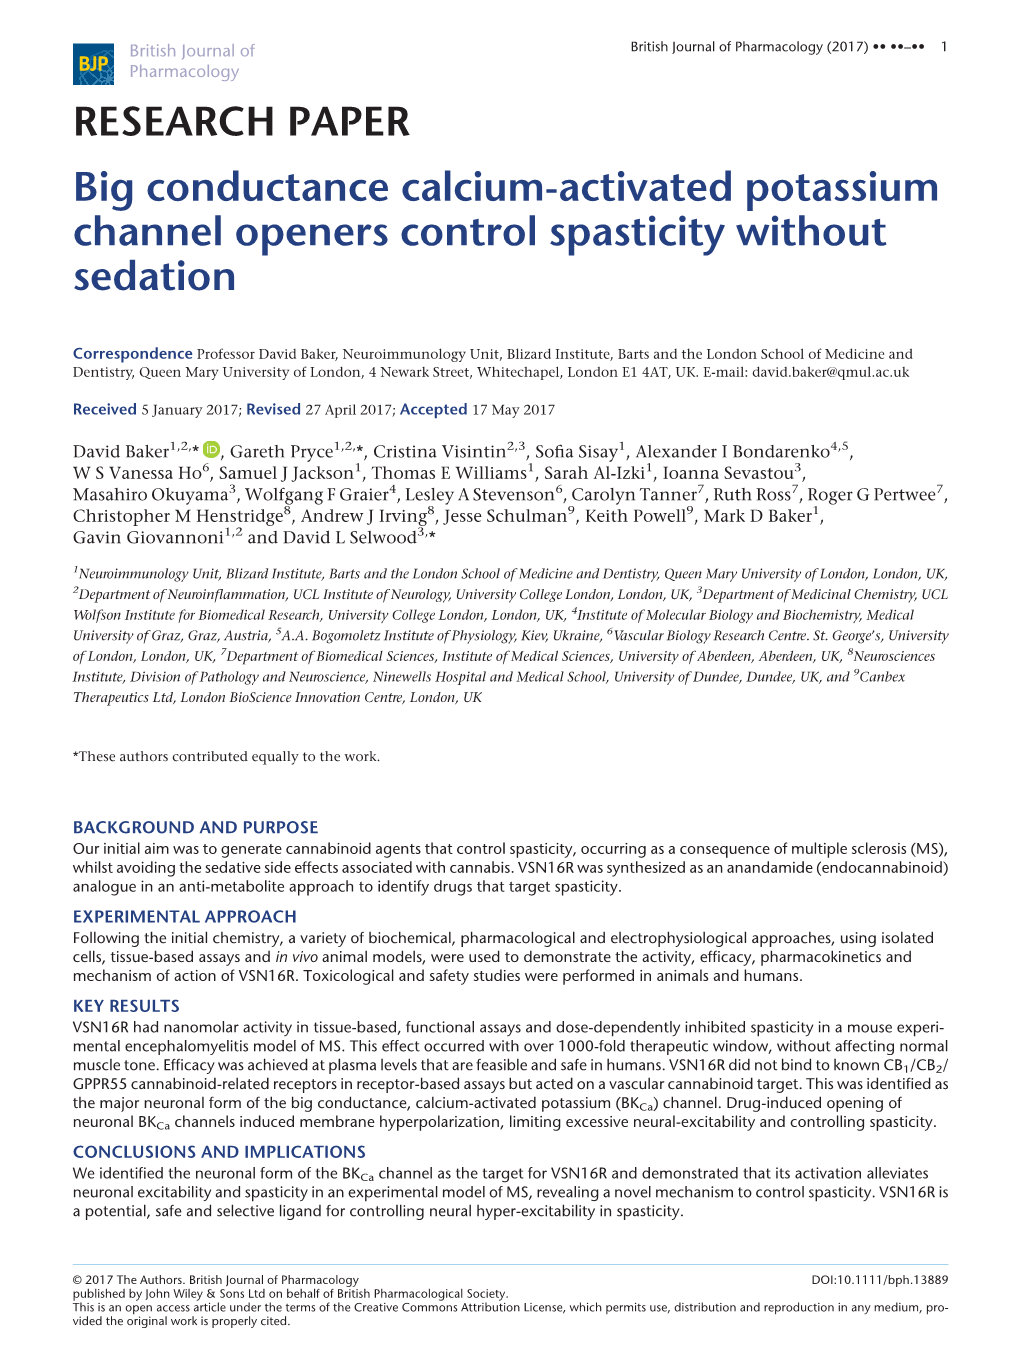 Big Conductance Calcium-Activated Potassium Channel Openers Control Spasticity Without Sedation